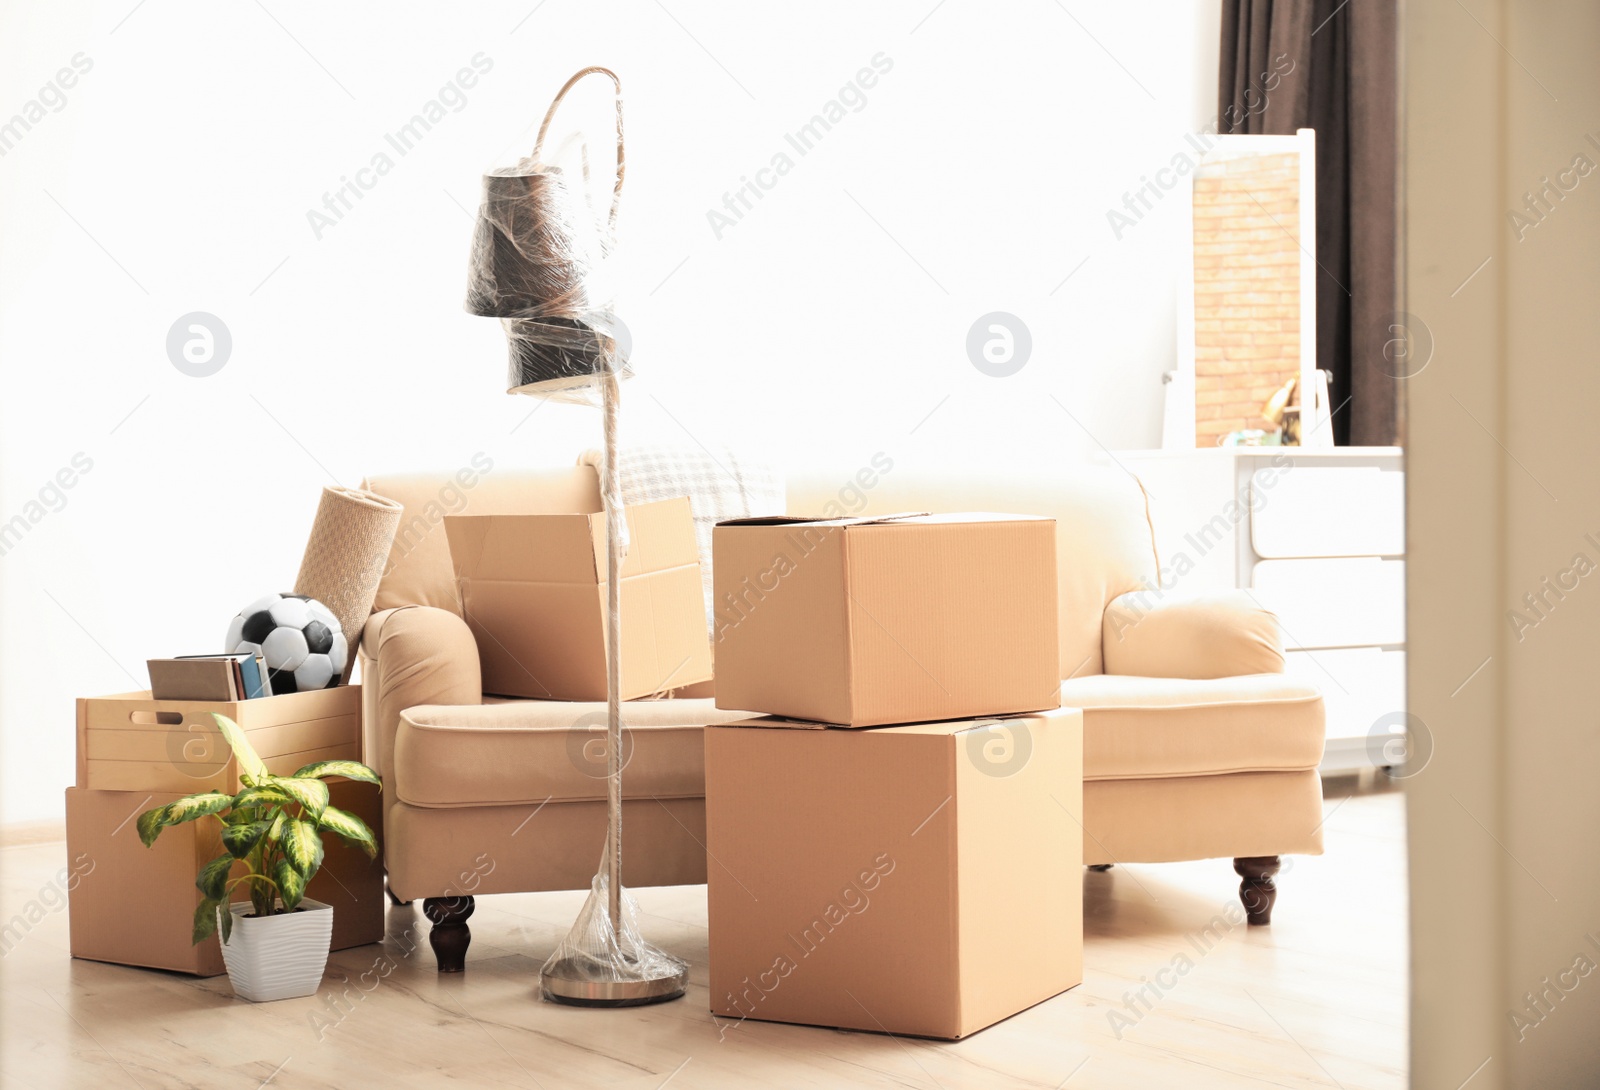 Photo of Cardboard boxes and household stuff in living room. Moving day